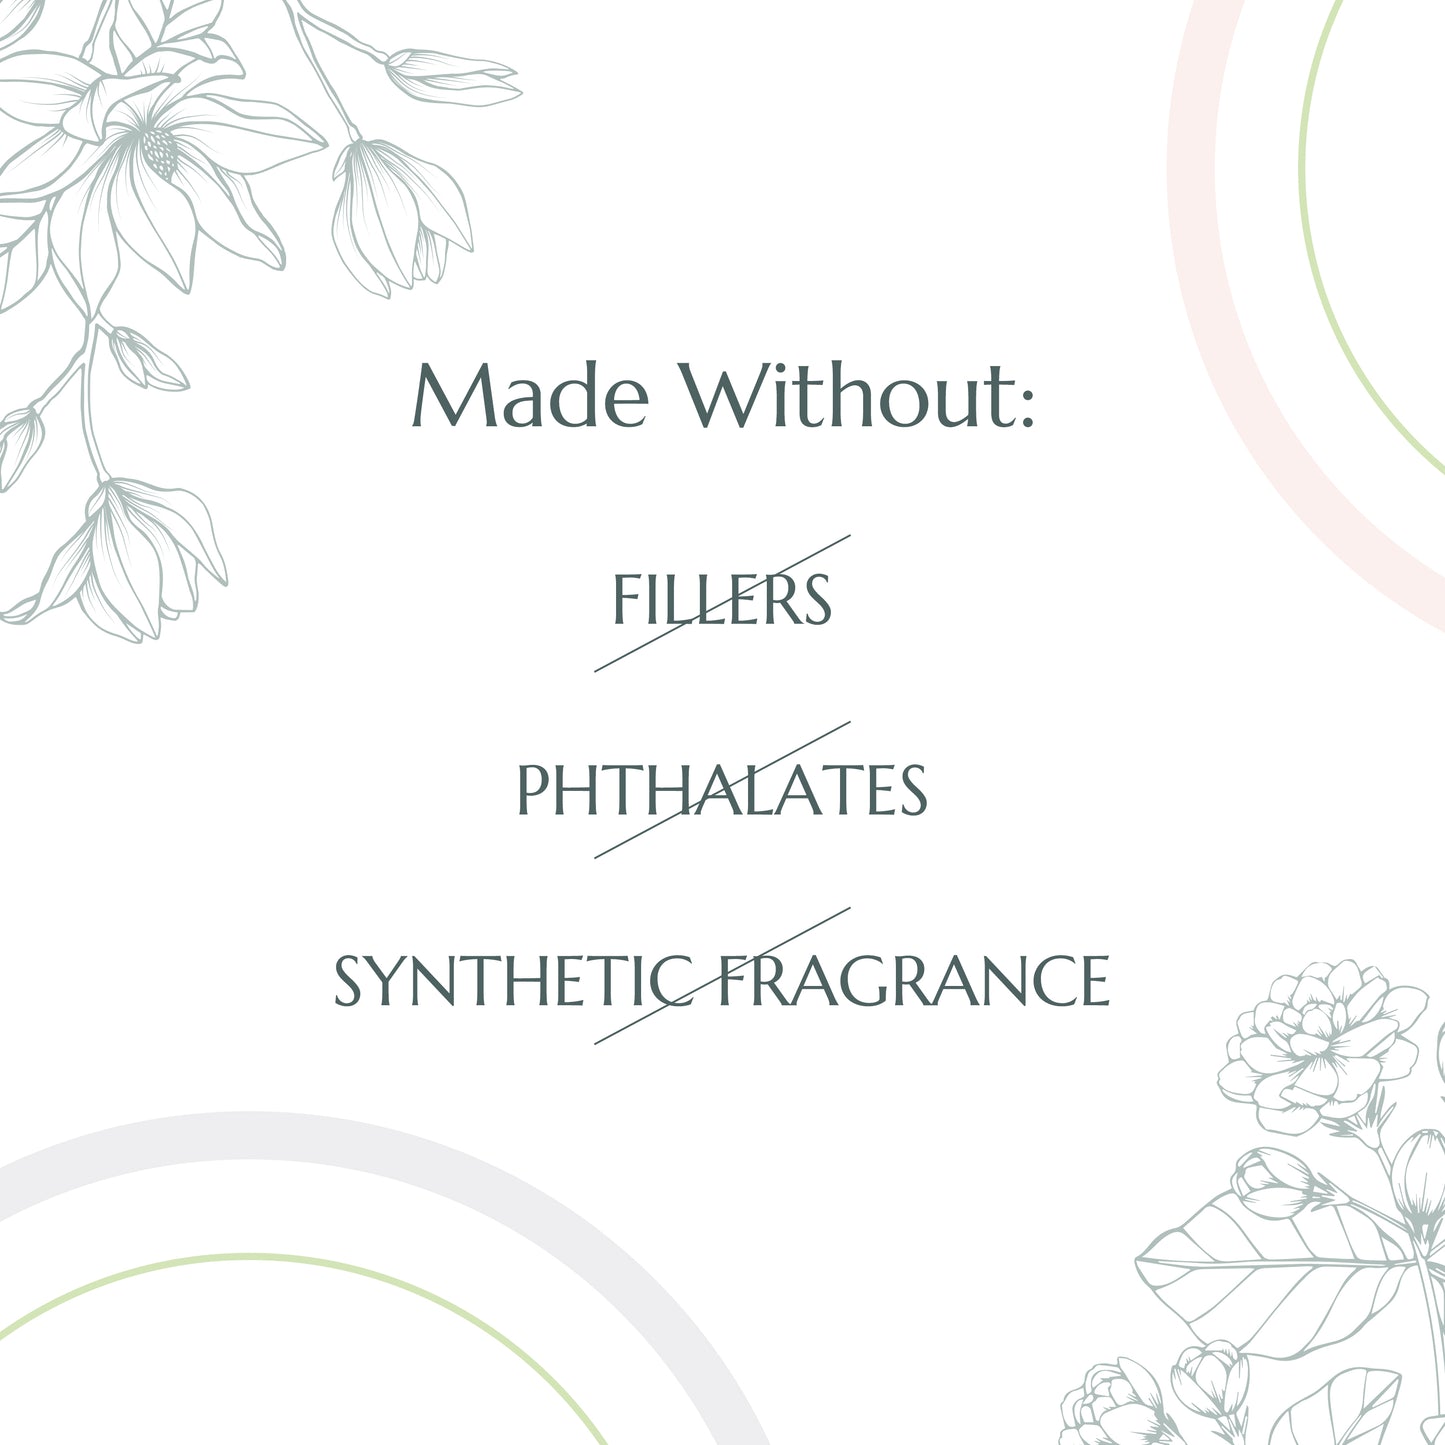 Made without fillers, phthalates or synthetic fragrances.